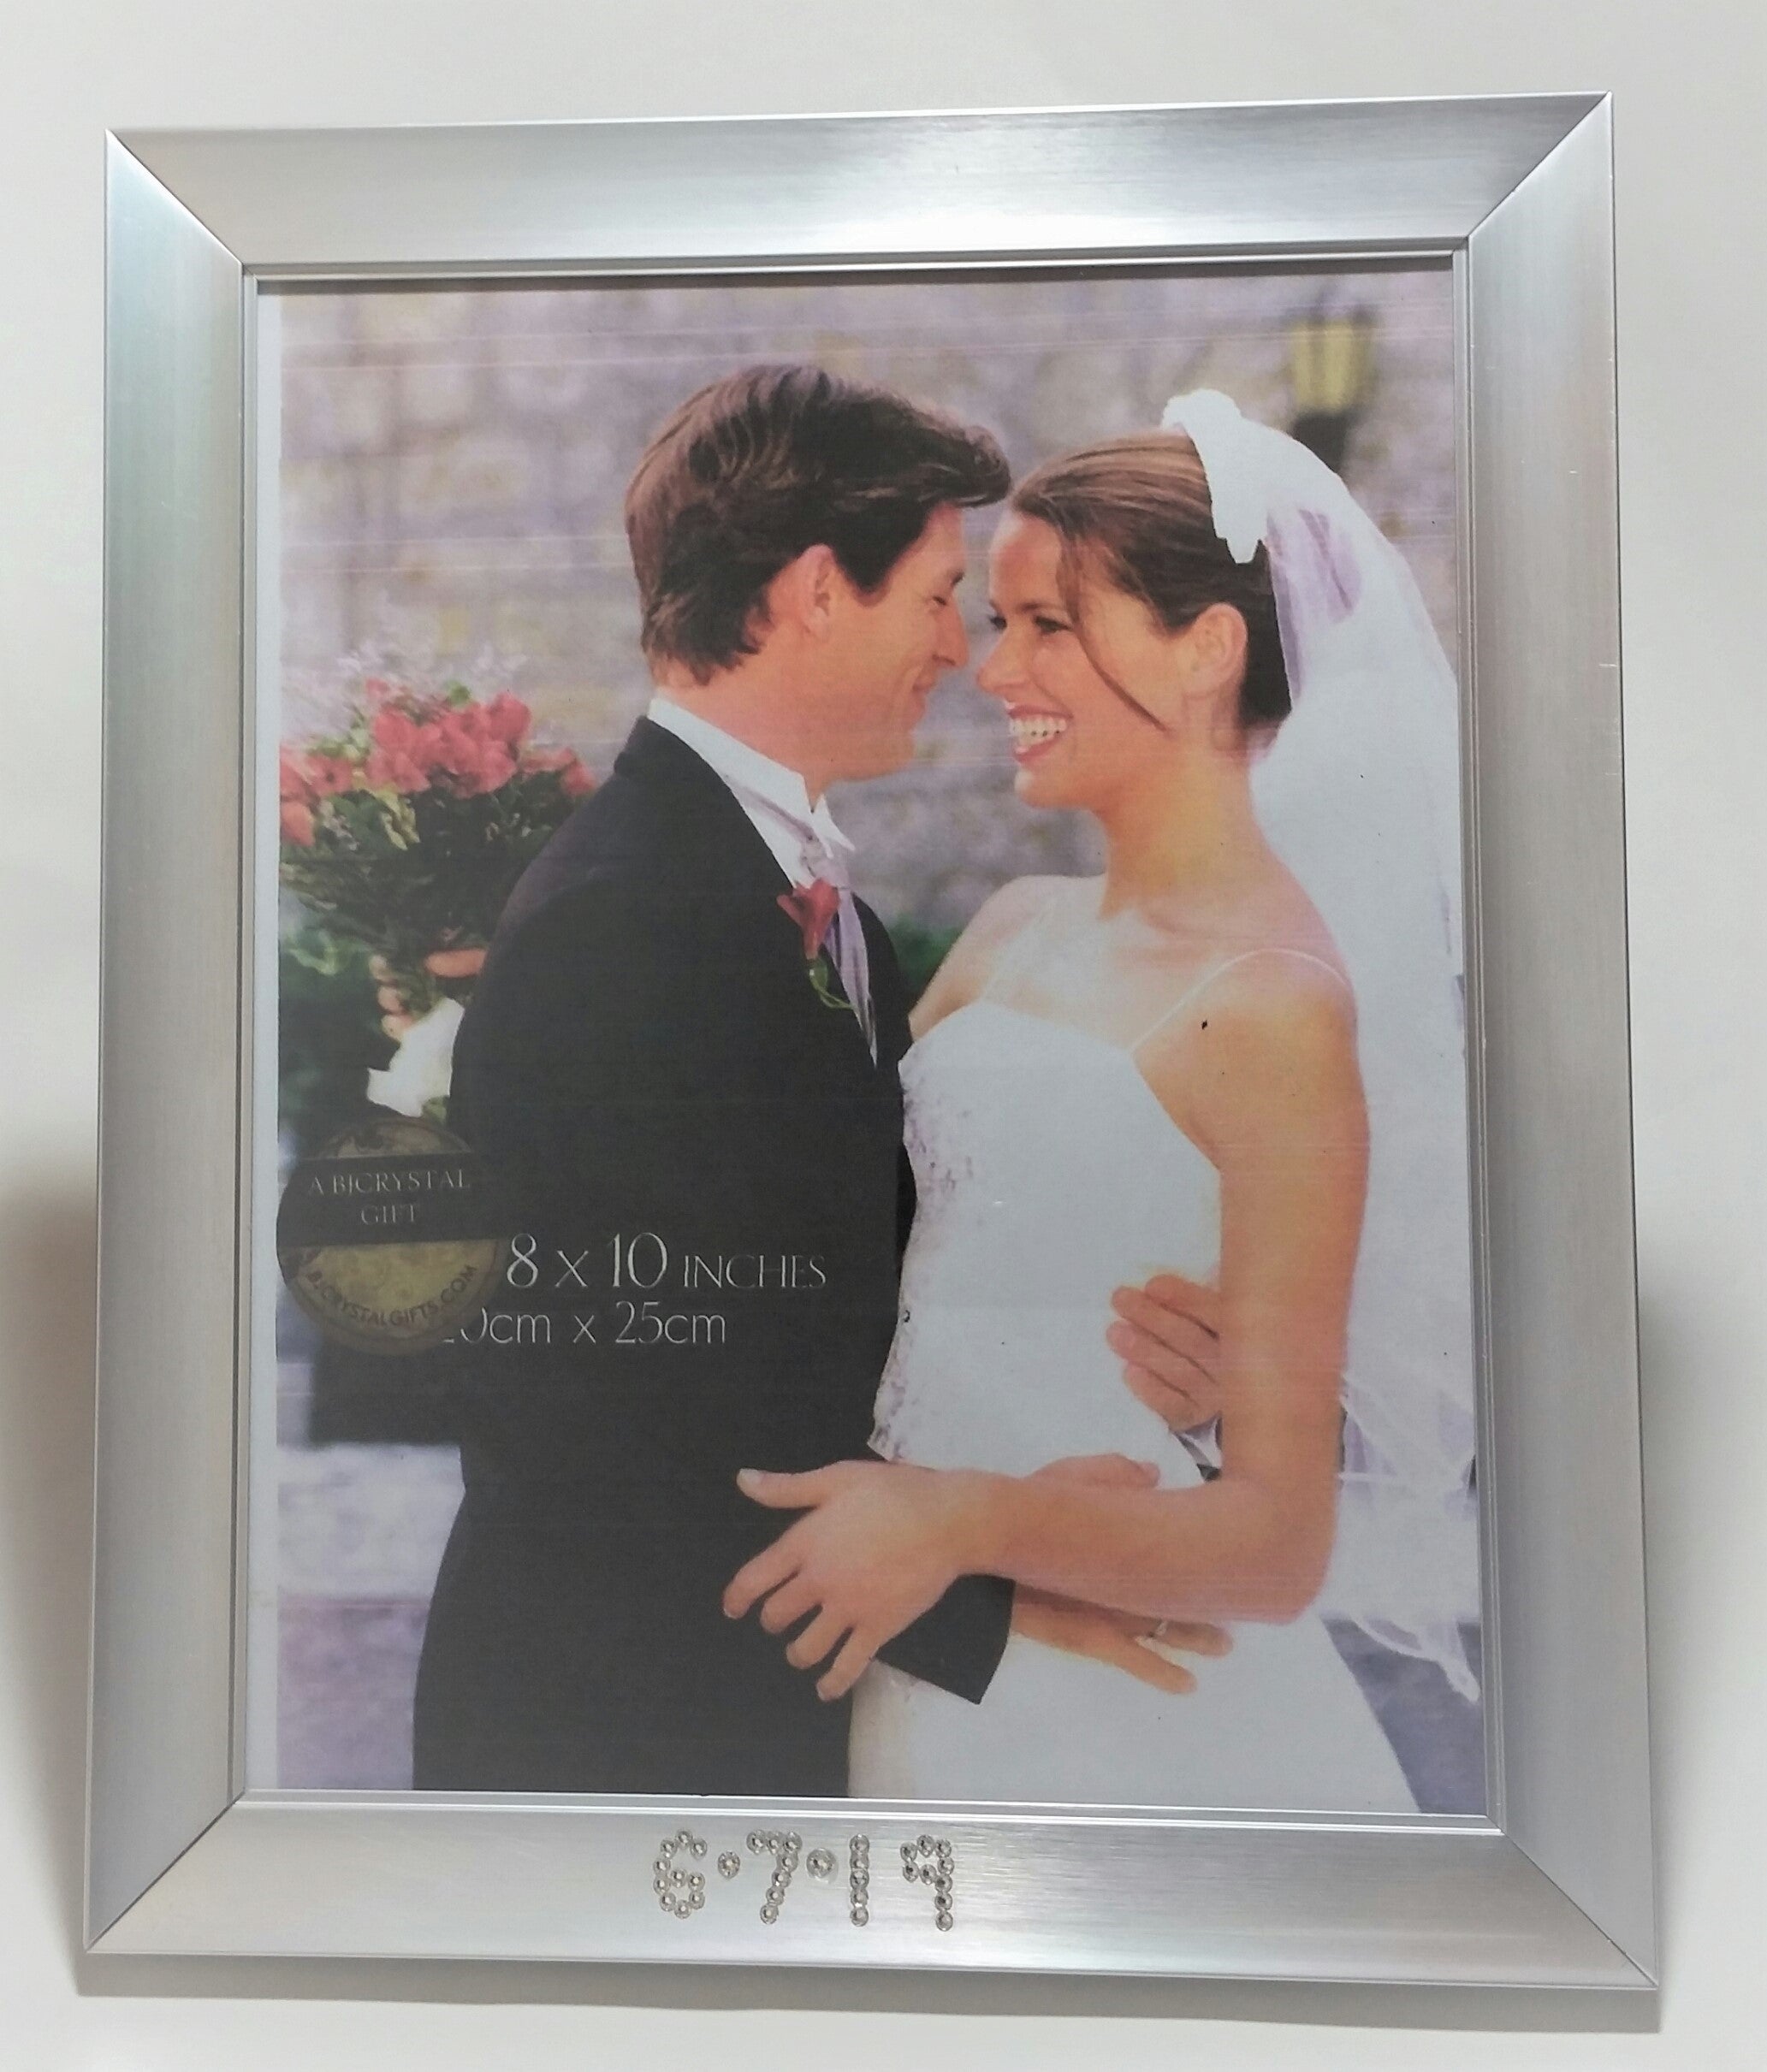 Personalized Wedding Picture Frame - Personalized Engagement Gift - Holds 8 X 10 Photo